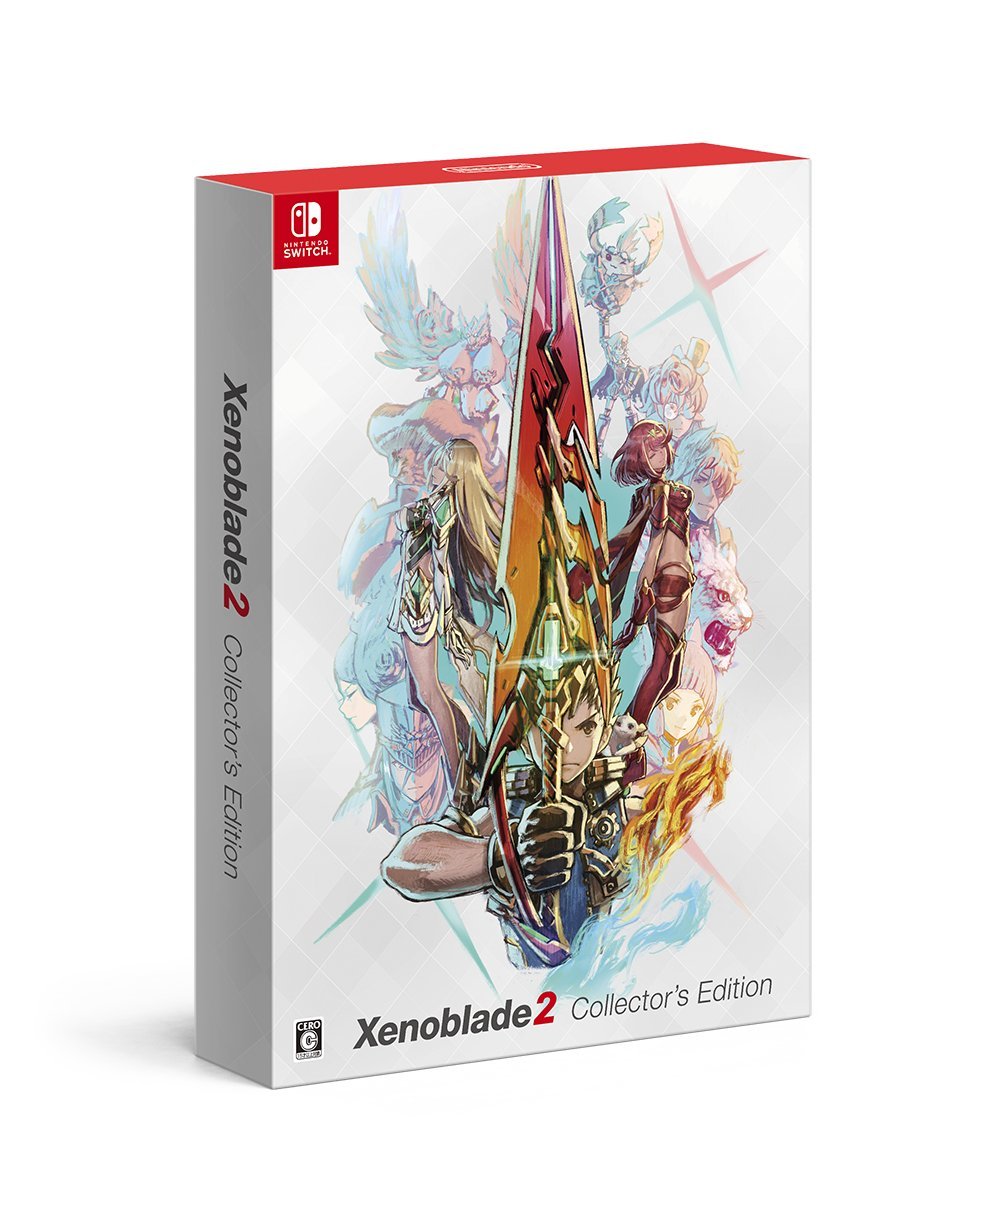 Xenoblade Chronicles 2 Collector's Edition, Pro Controller Up For 